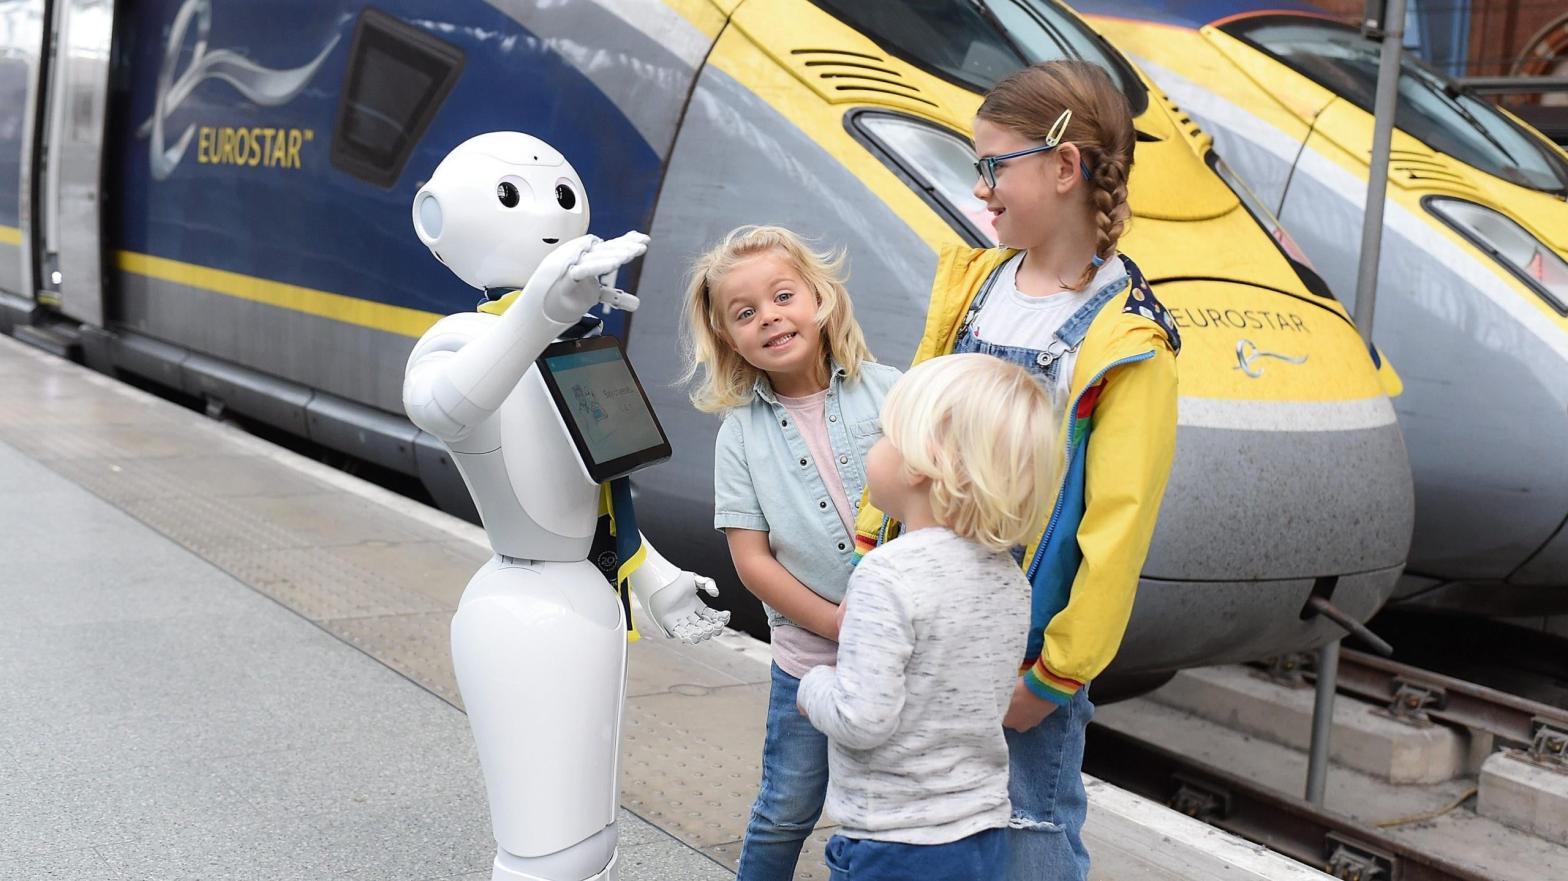 Pepper the robot meets Eurostar customers at St Pancras International station in London, England on October 23, 2018. (Photo: Tabatha Fireman, Getty Images)